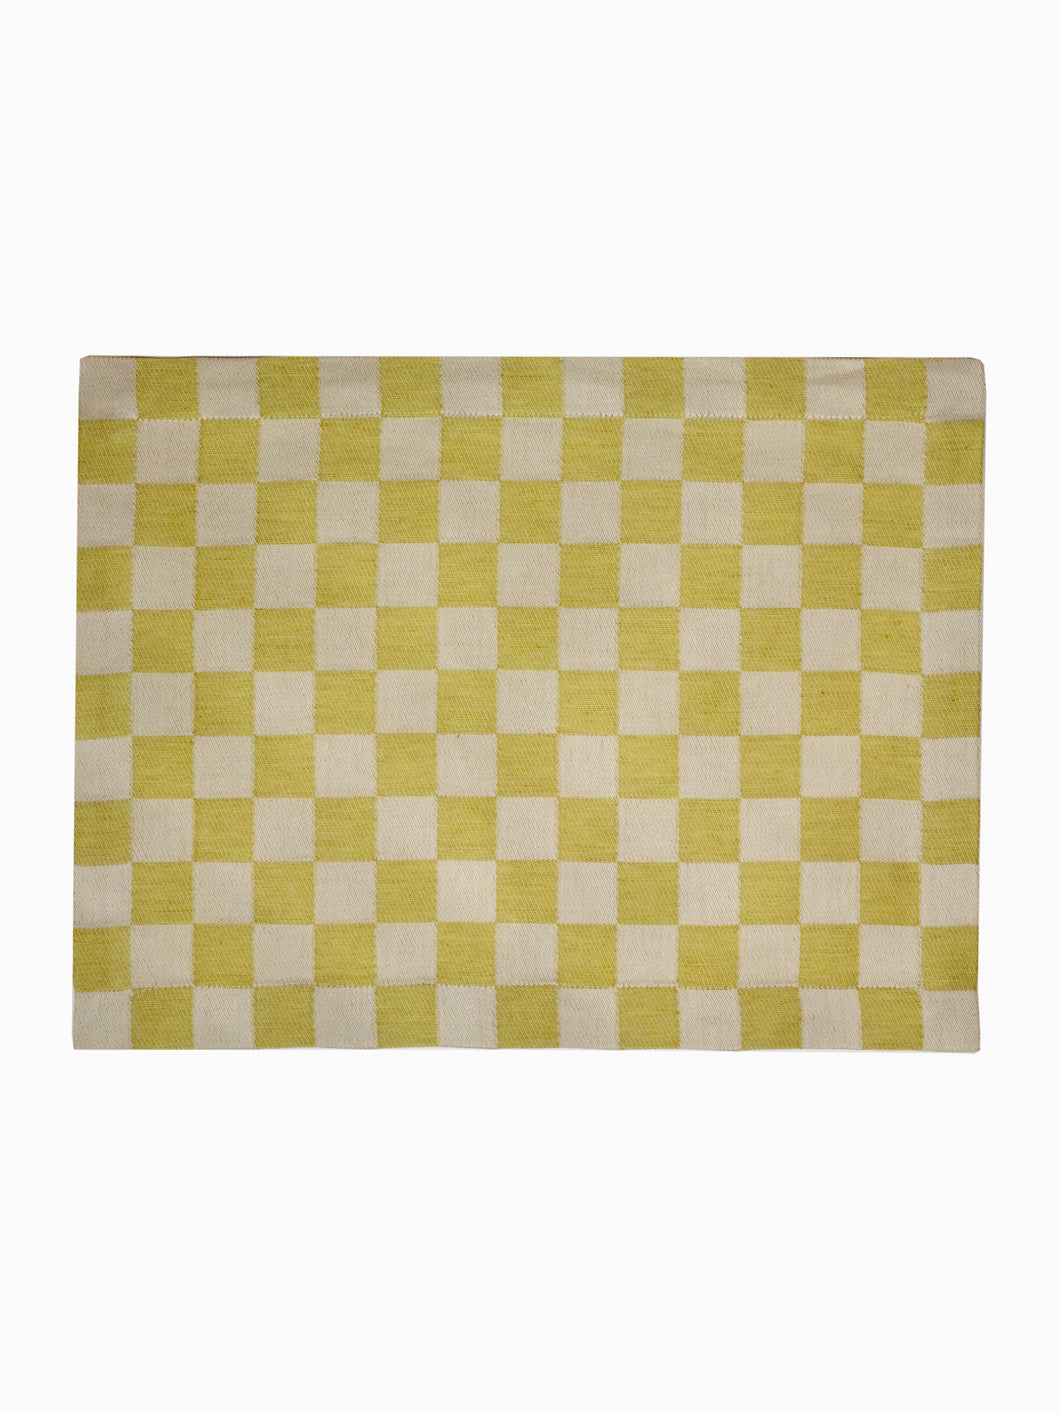 Checkerboard Placemat in Chartreuse